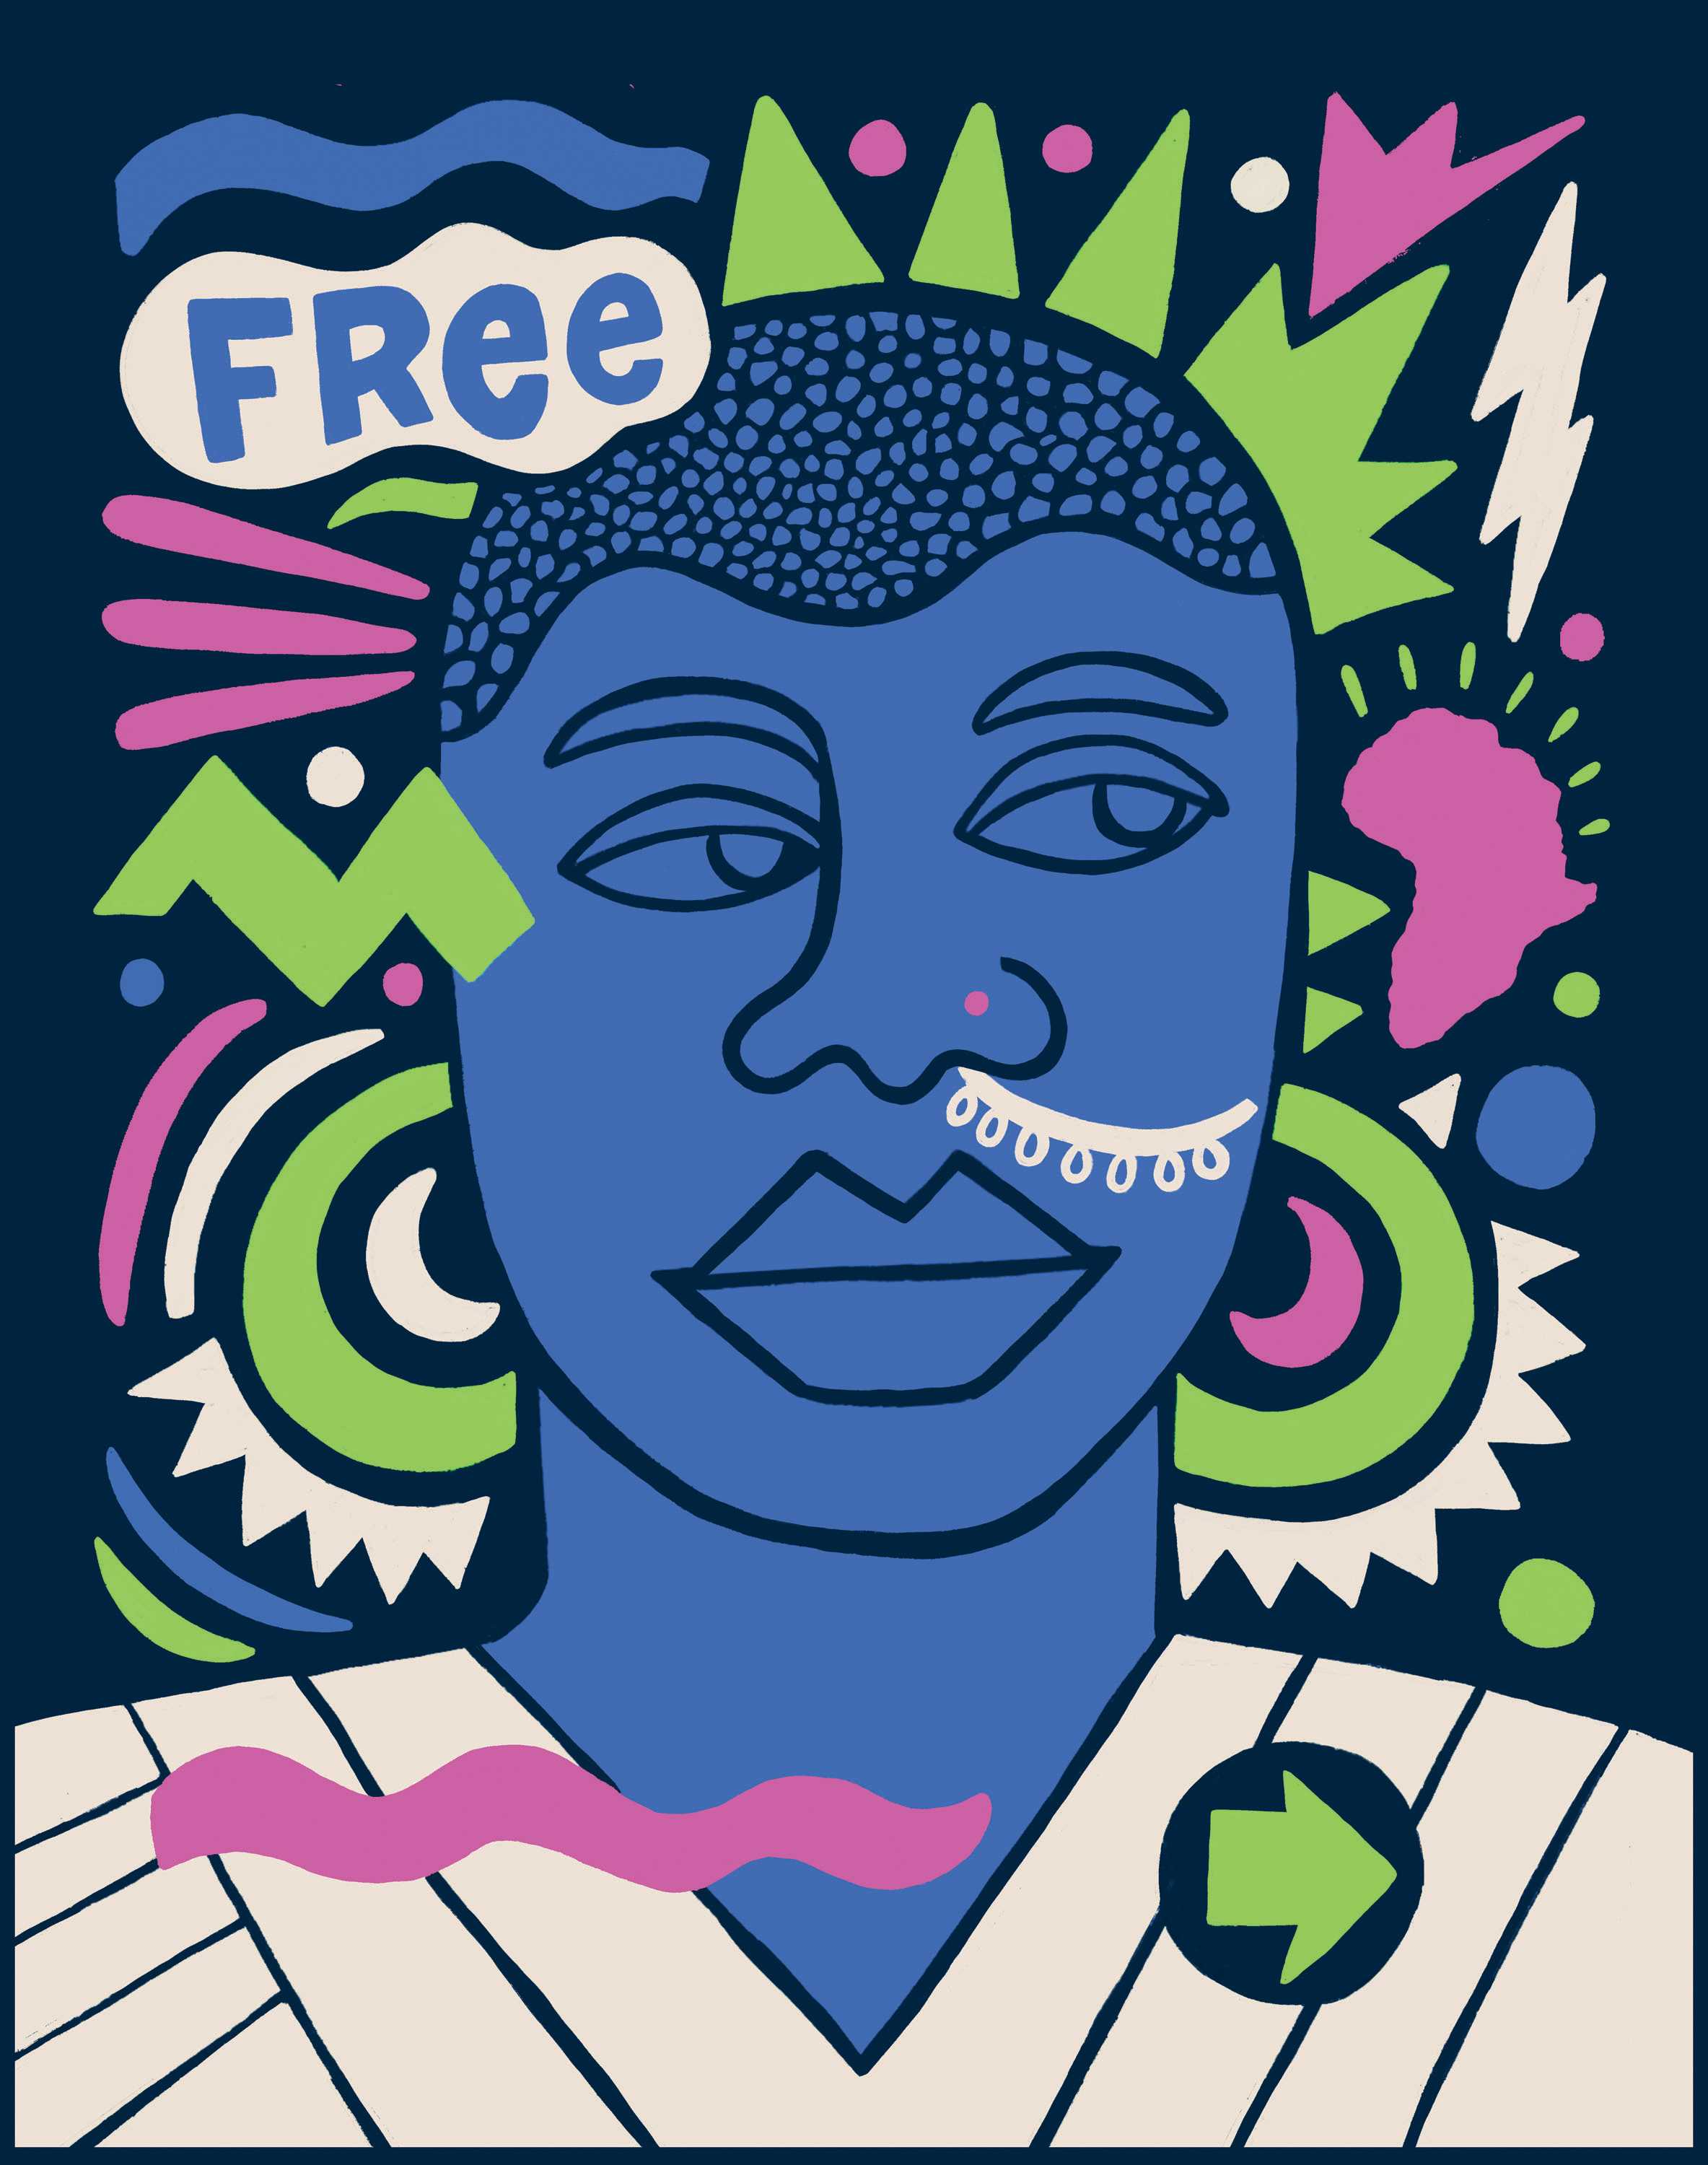 Color poster of man with blue head  and colorful forms in the background.  The word FREE is written on the top left.